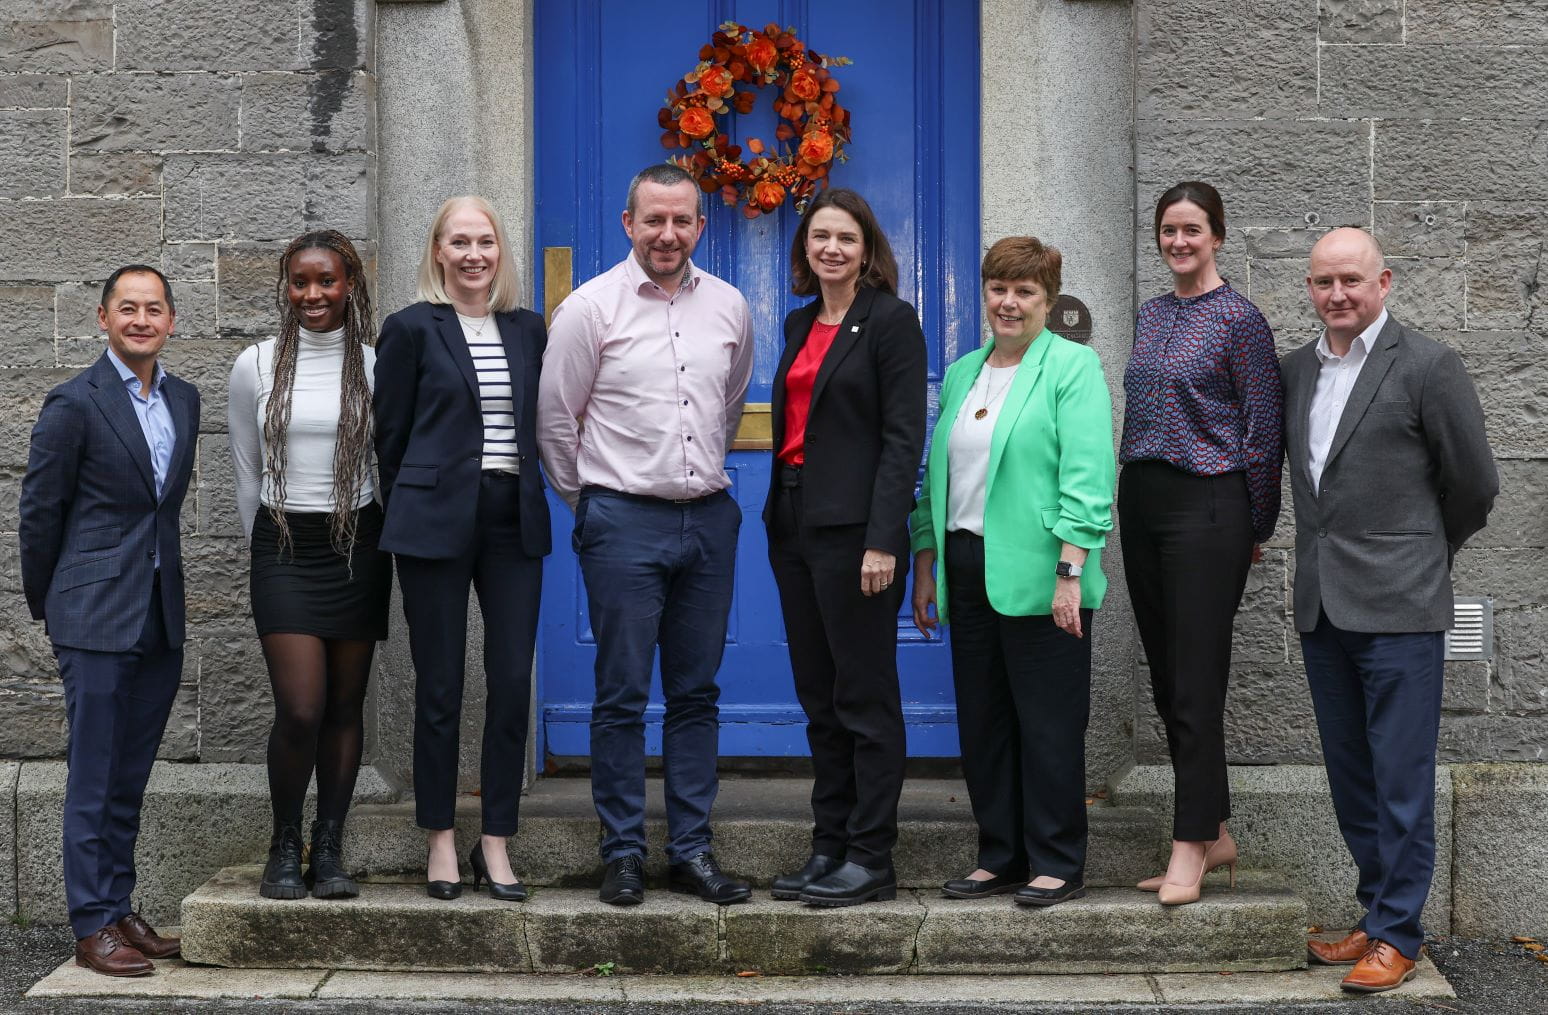 West Partners with DCU to Empower Students from Socio-Economically Disadvantaged Communities